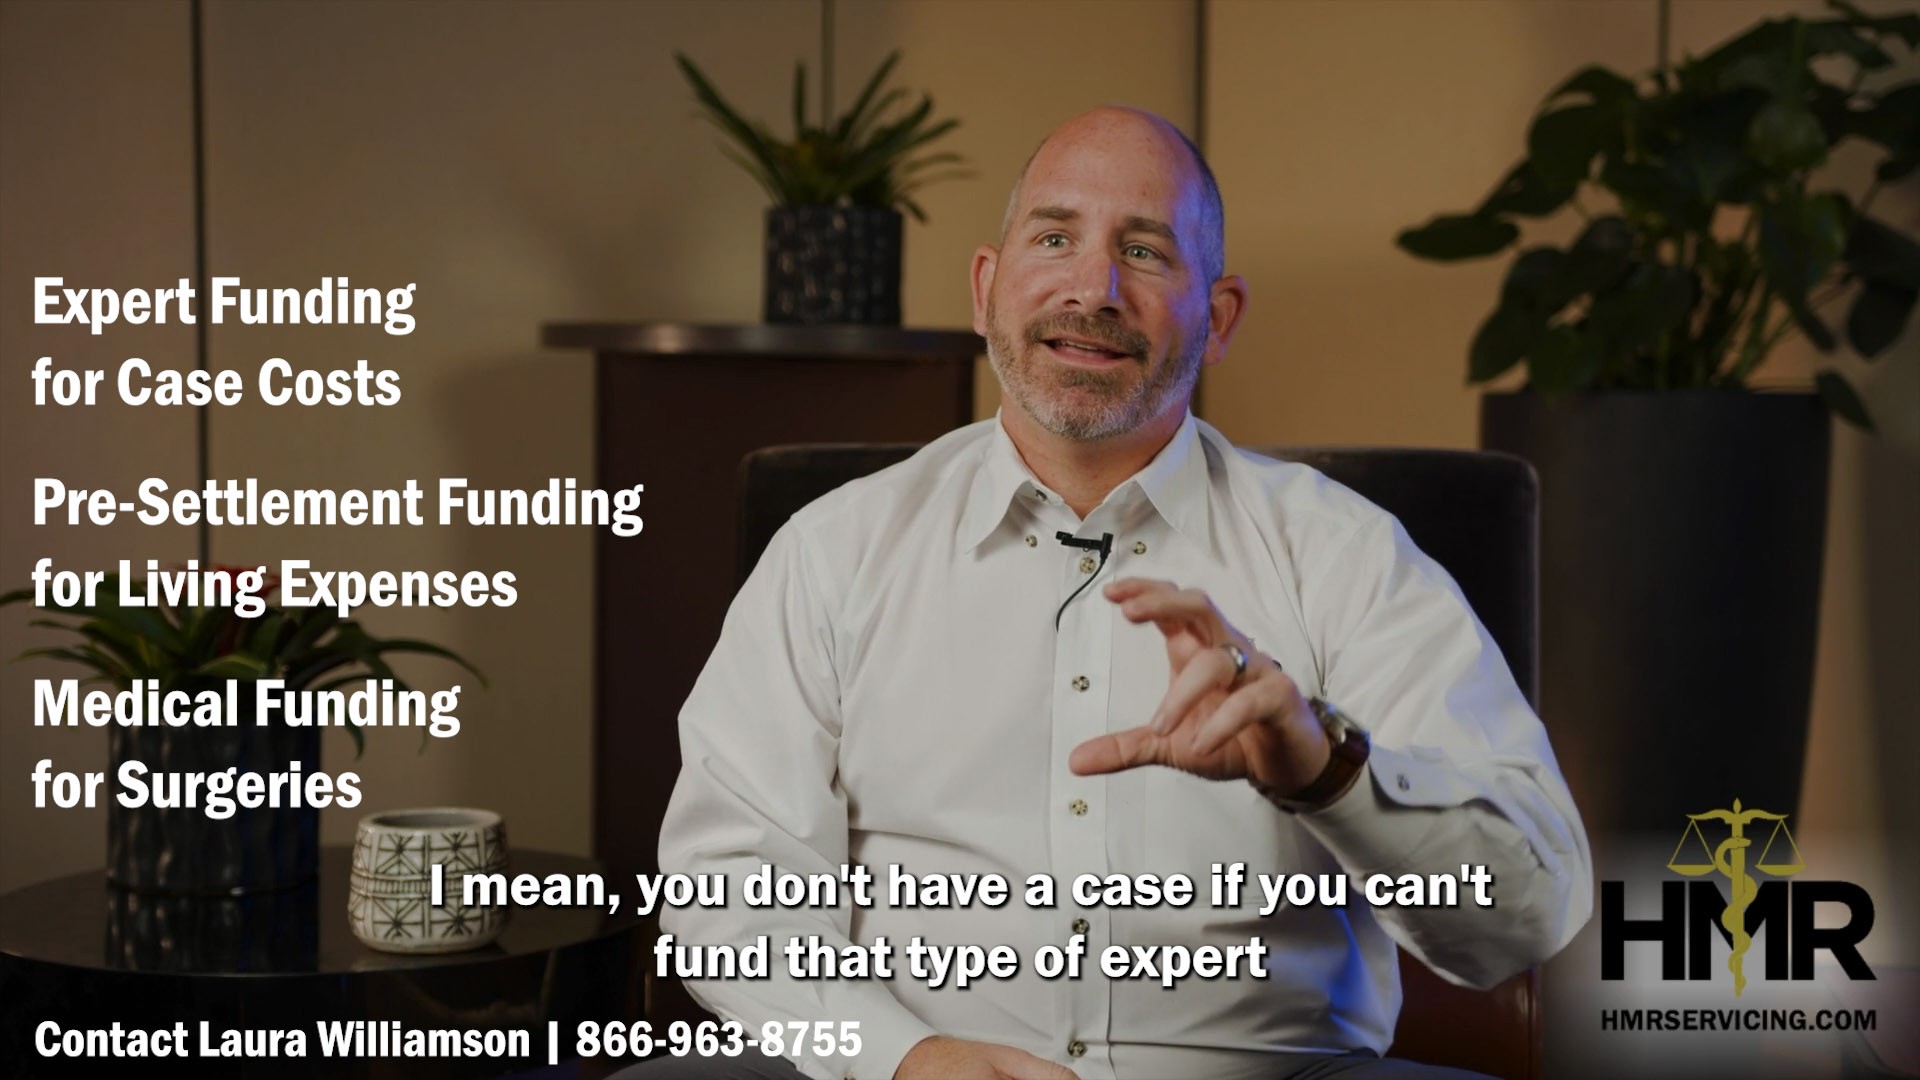 Expert Funding Gives You the Financial Firepower to Prove Your Case